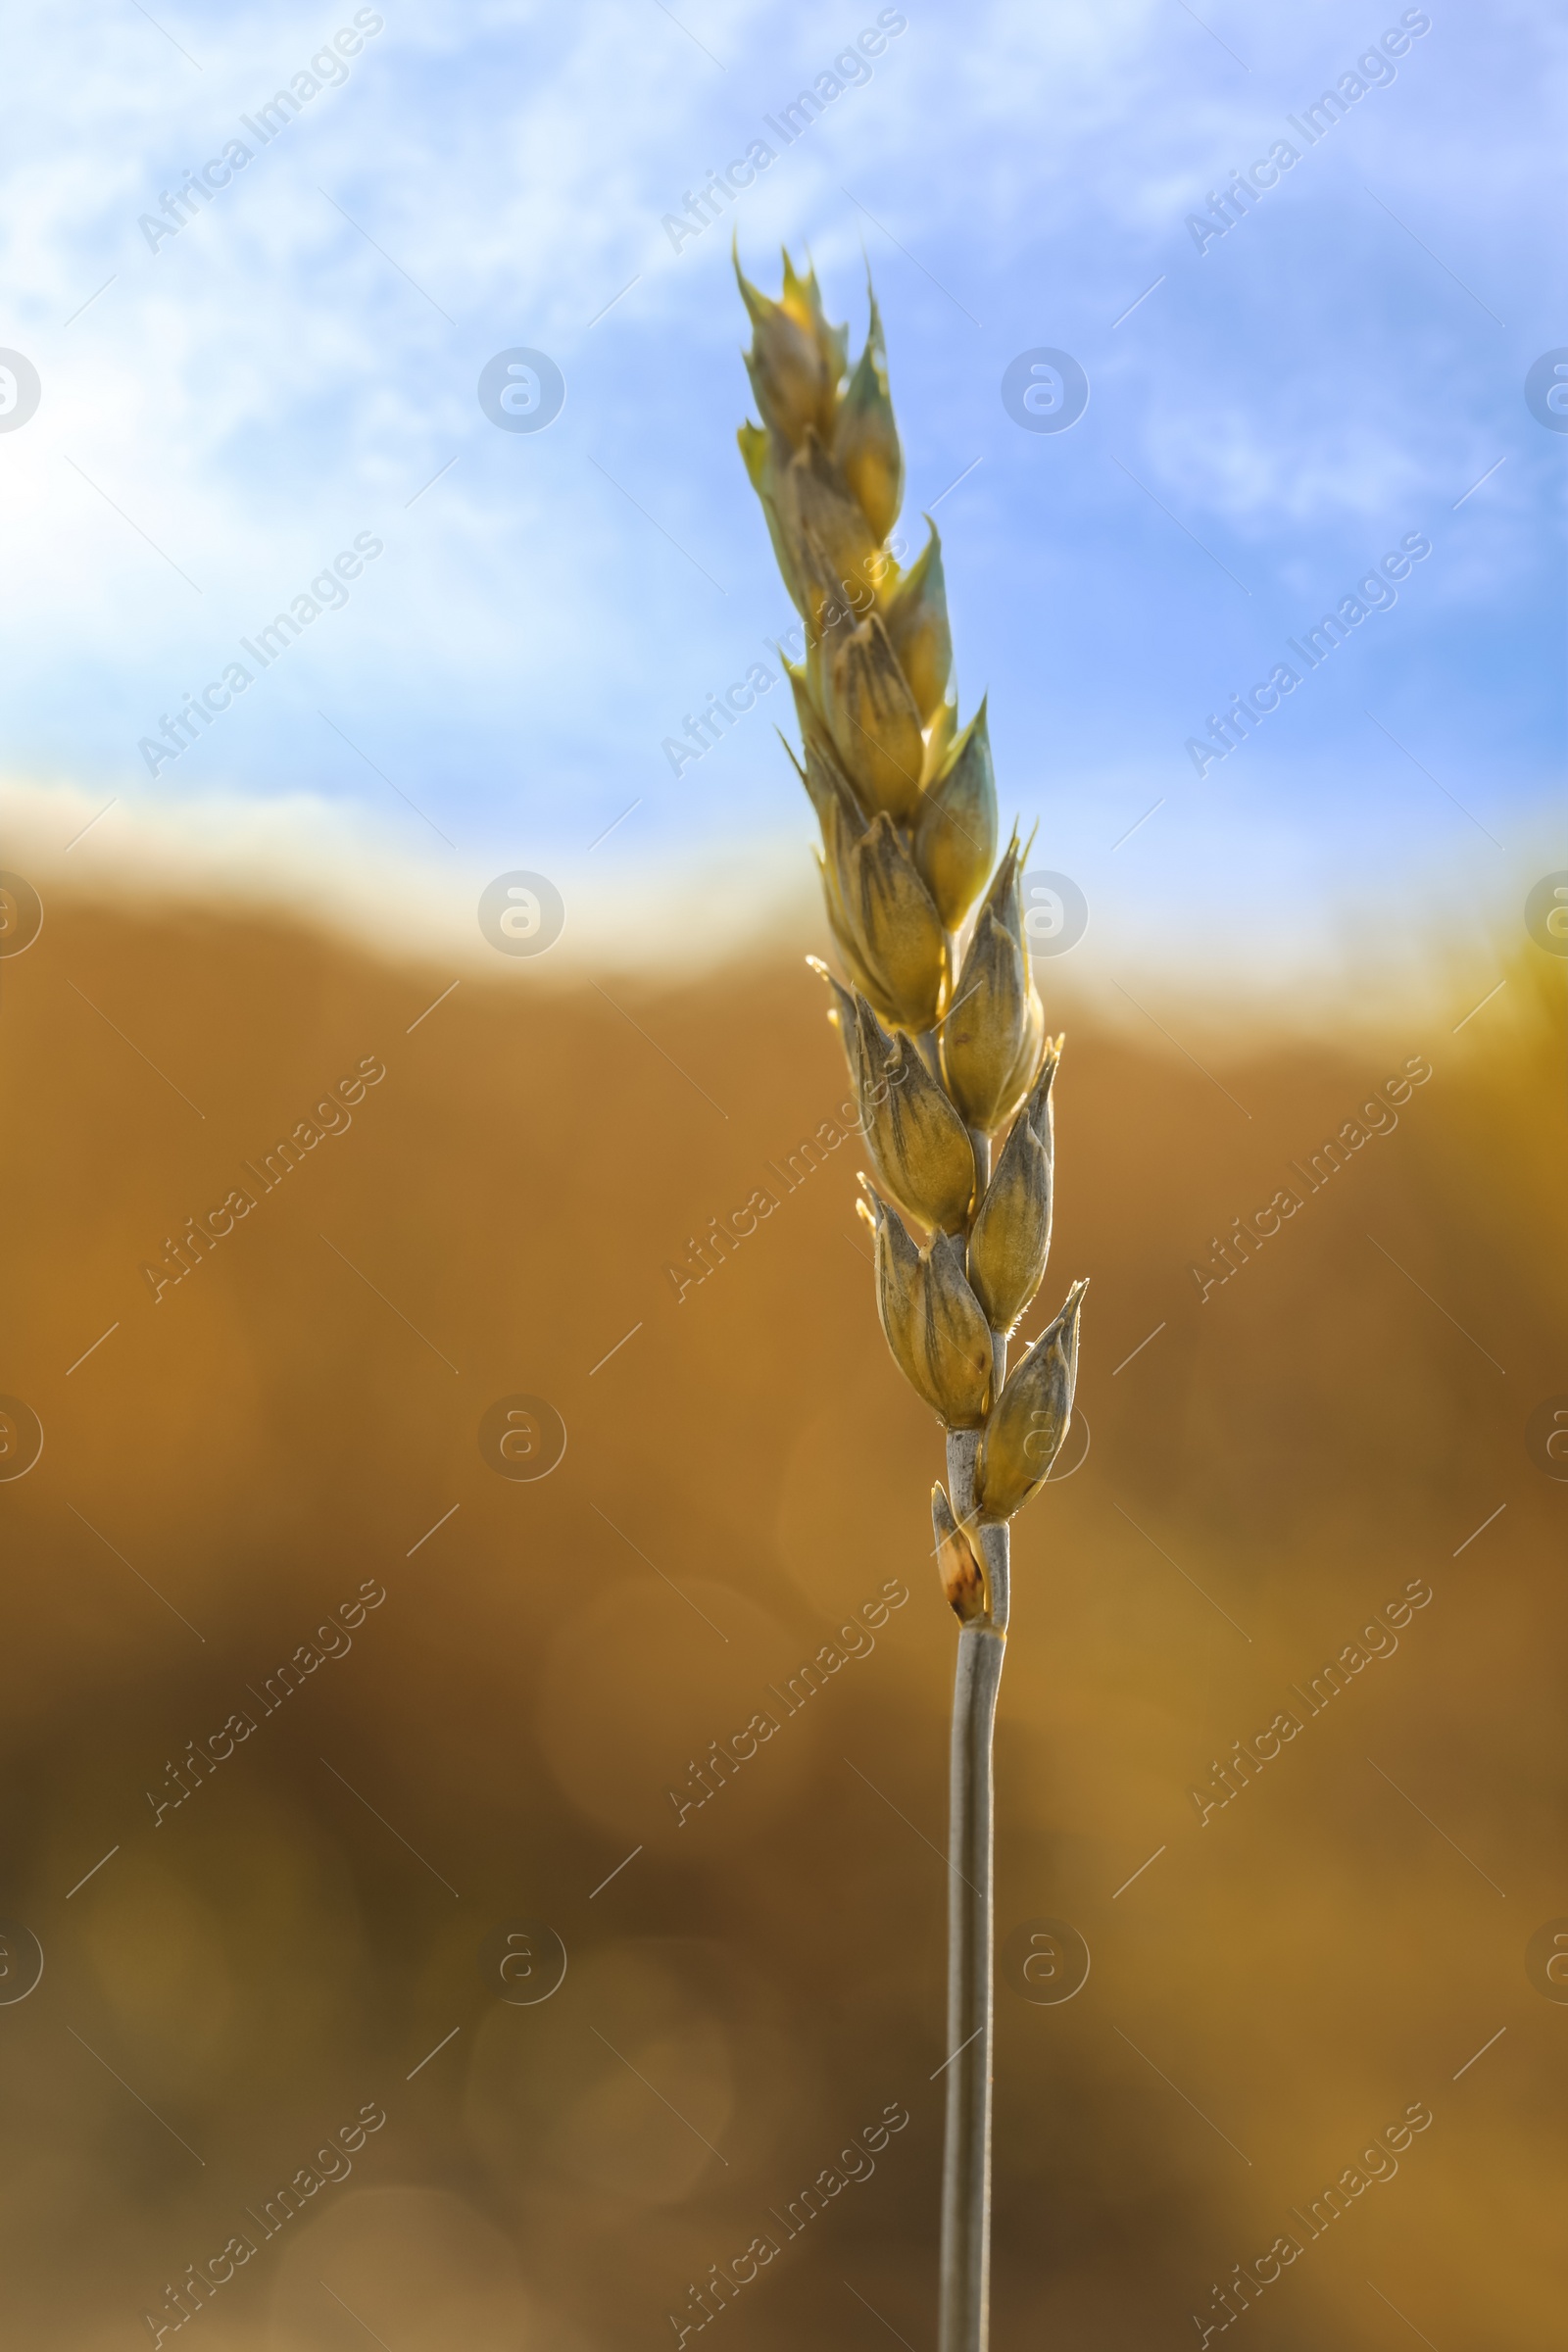 Photo of Ear of wheat against blurred background, closeup